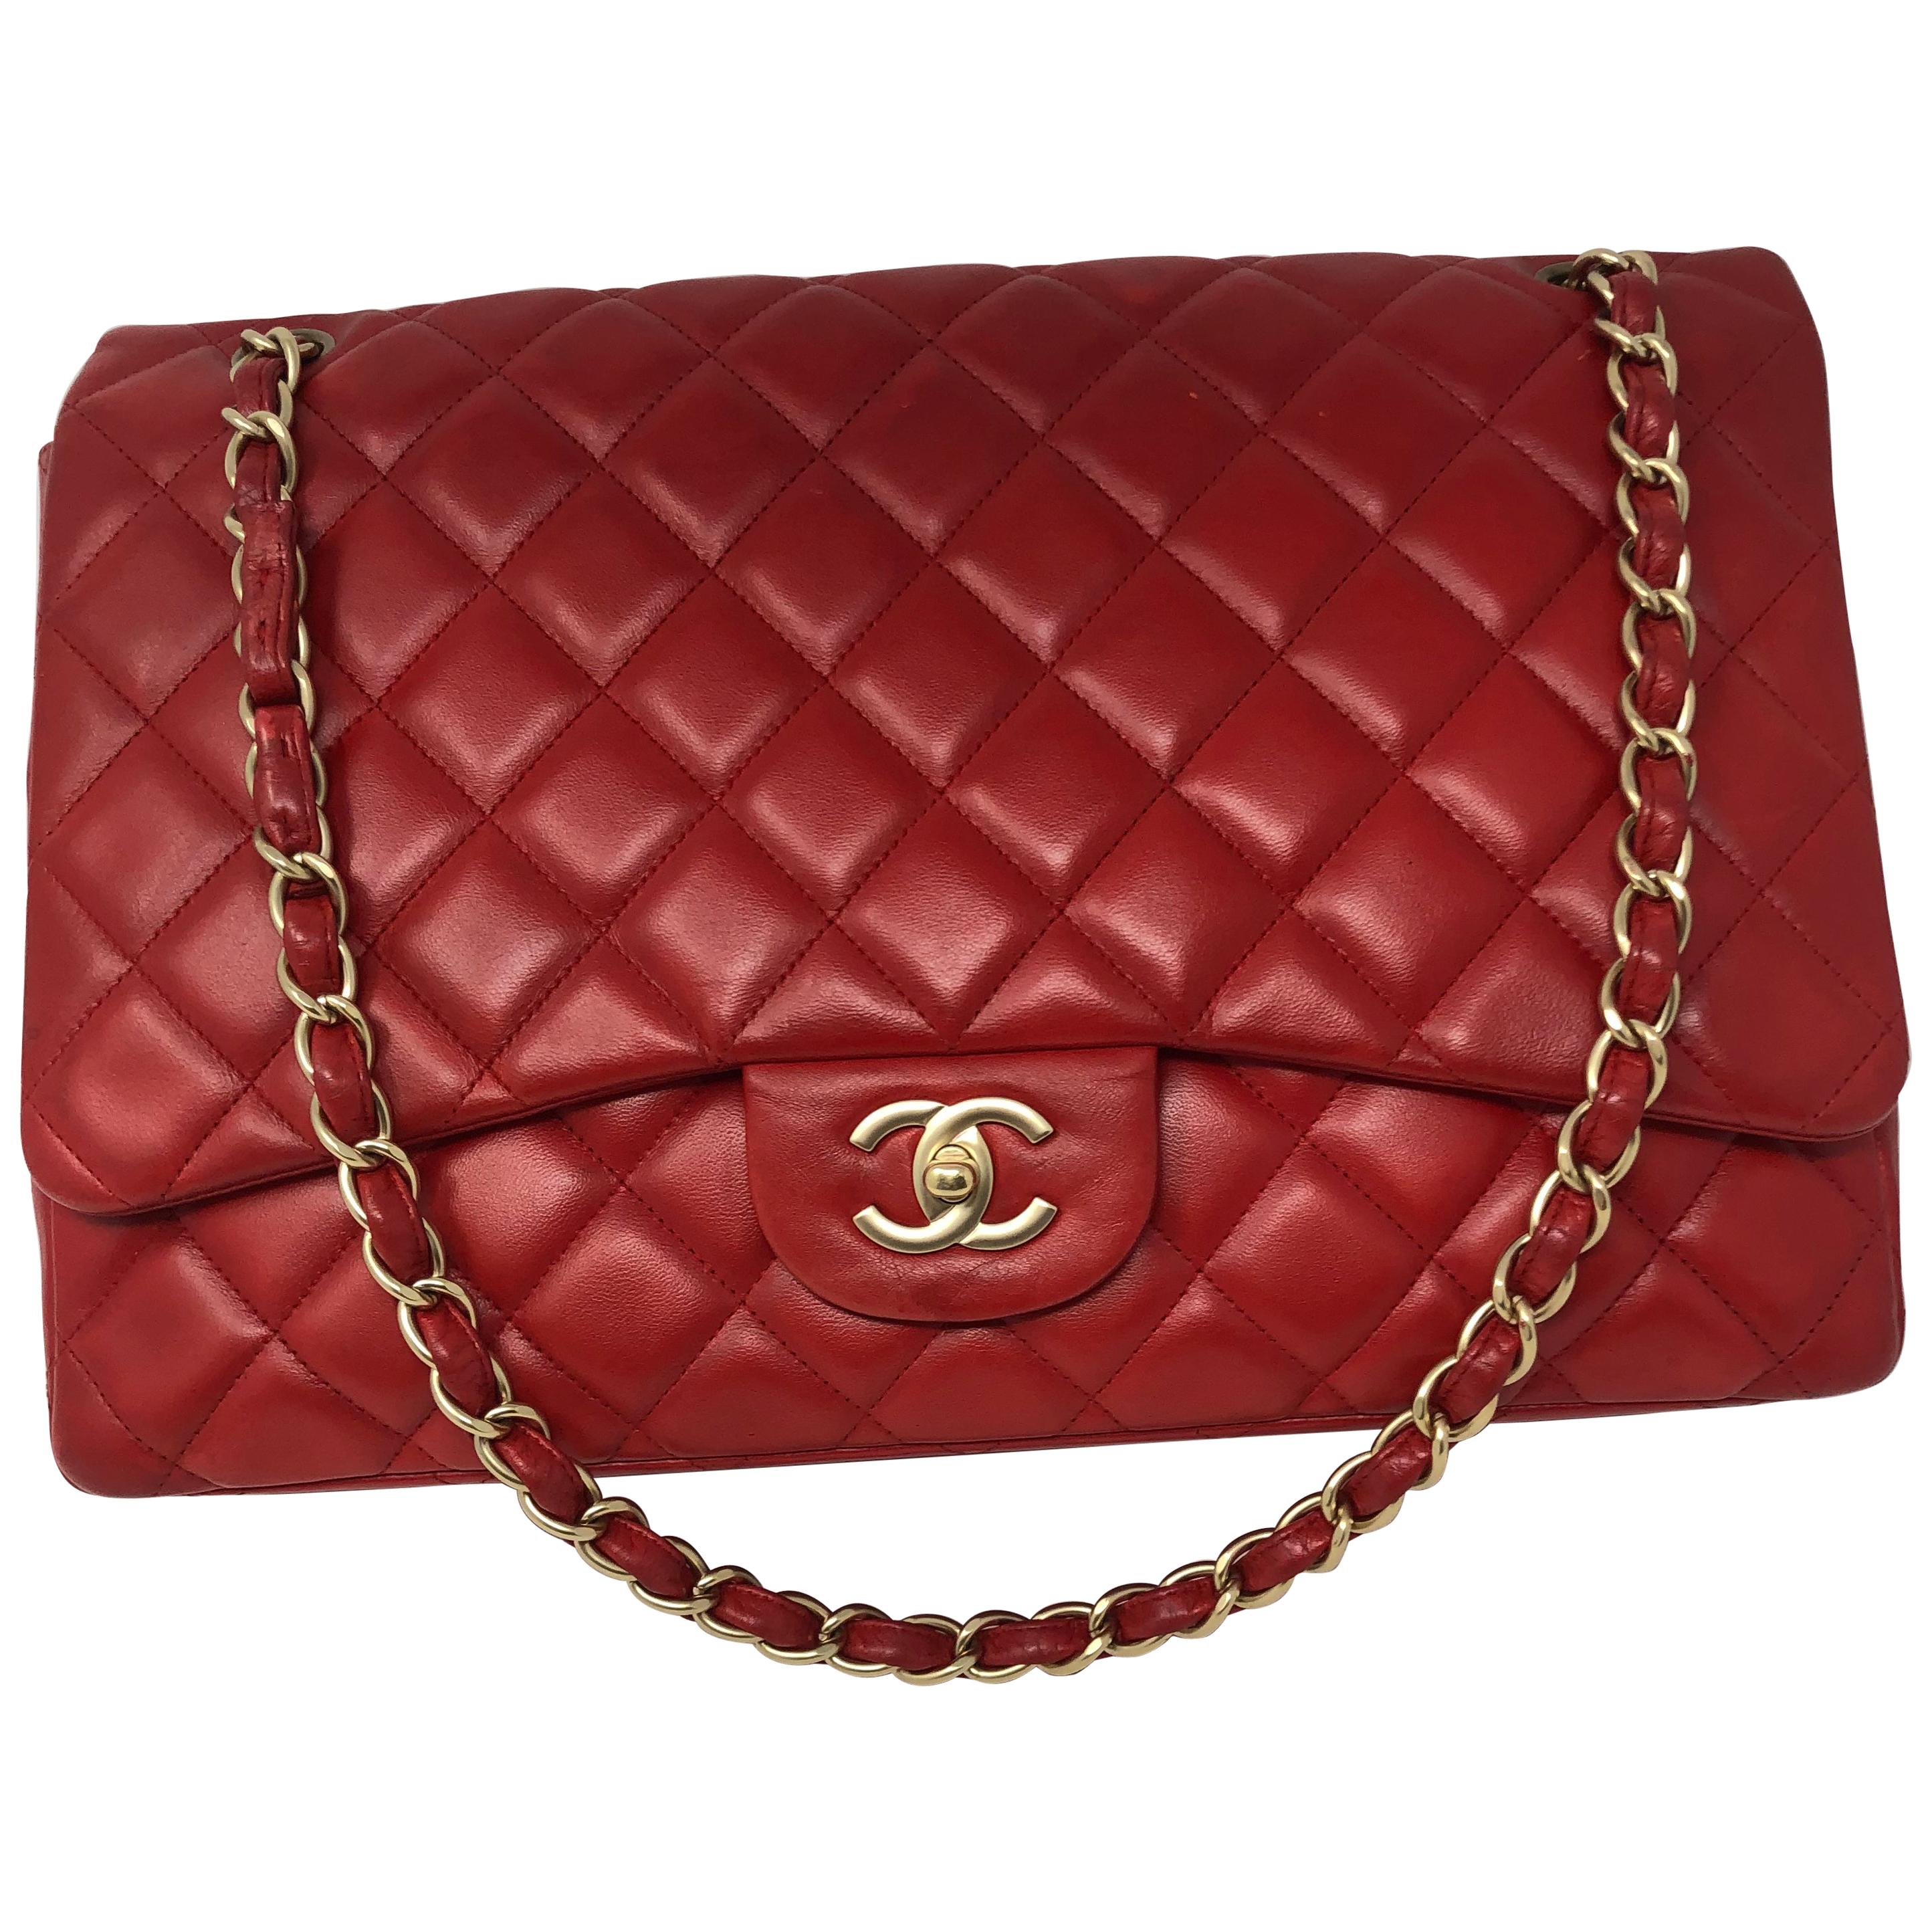 Chanel Red Maxi Bag